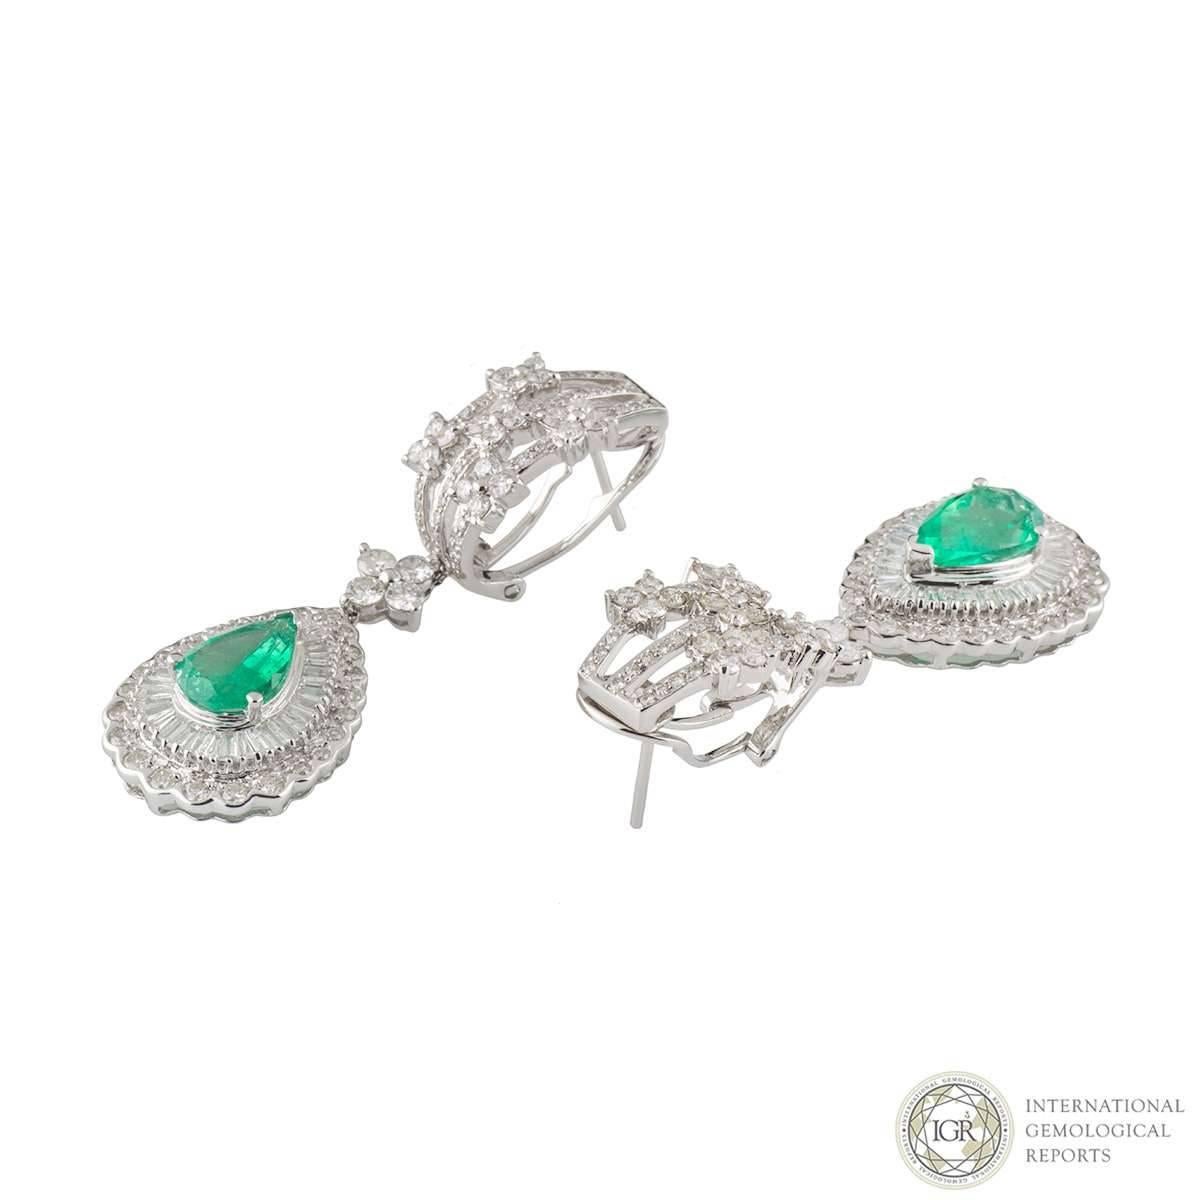 A lovely pair of 18k white gold diamond and emerald drop earrings. The earrings comprise of a 3 row openwork design with round brilliant cut diamonds. Accentuating this design is pear cut emerald in a claw setting with a double row of diamonds, both